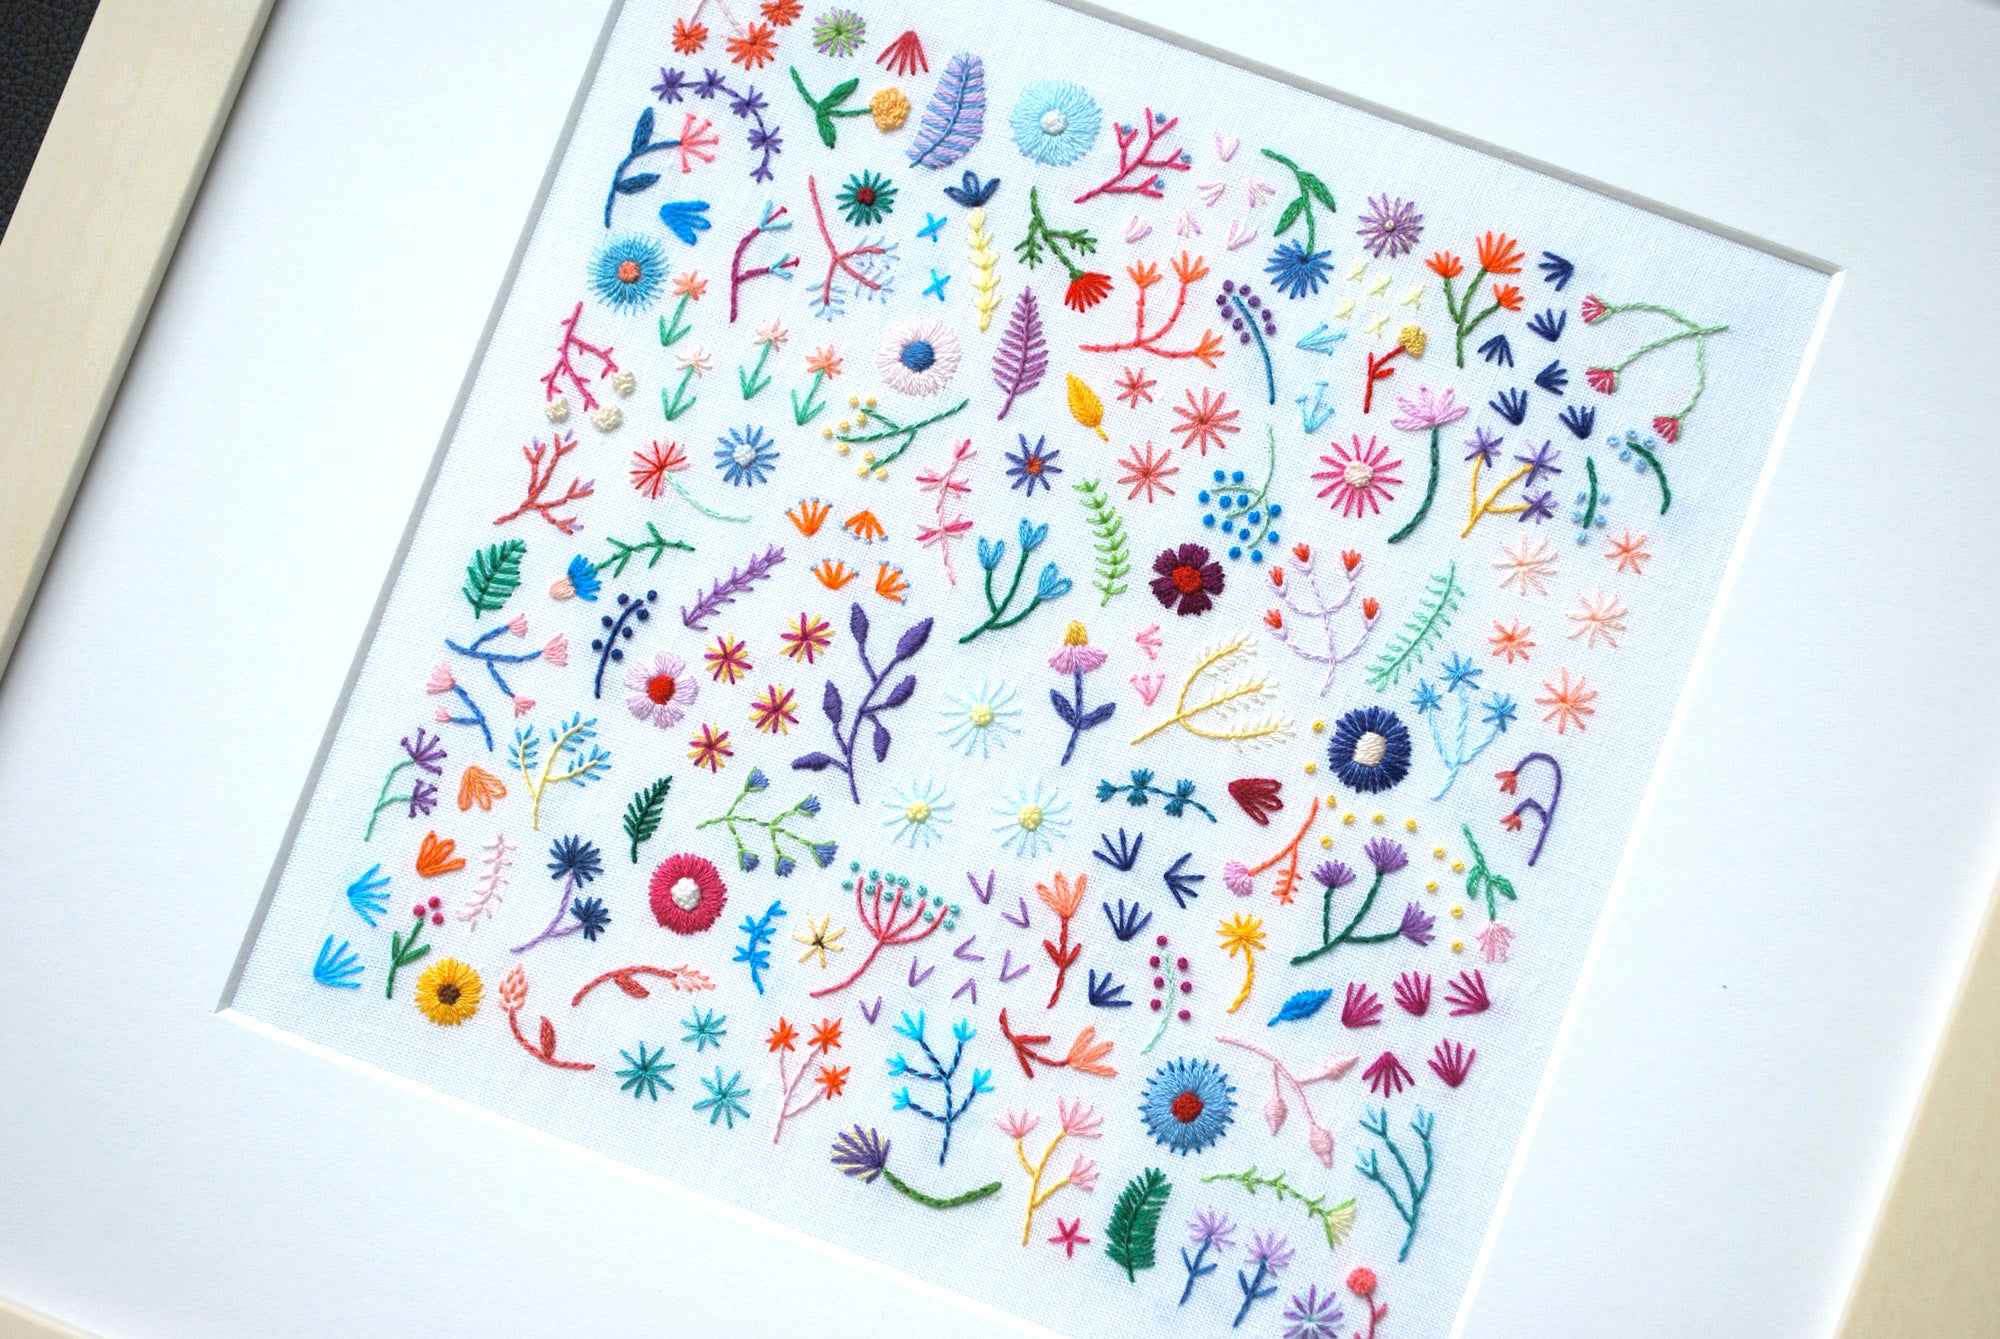 Rainbow Flowers Field (7.00") on White Linen Hand Embroidered Art